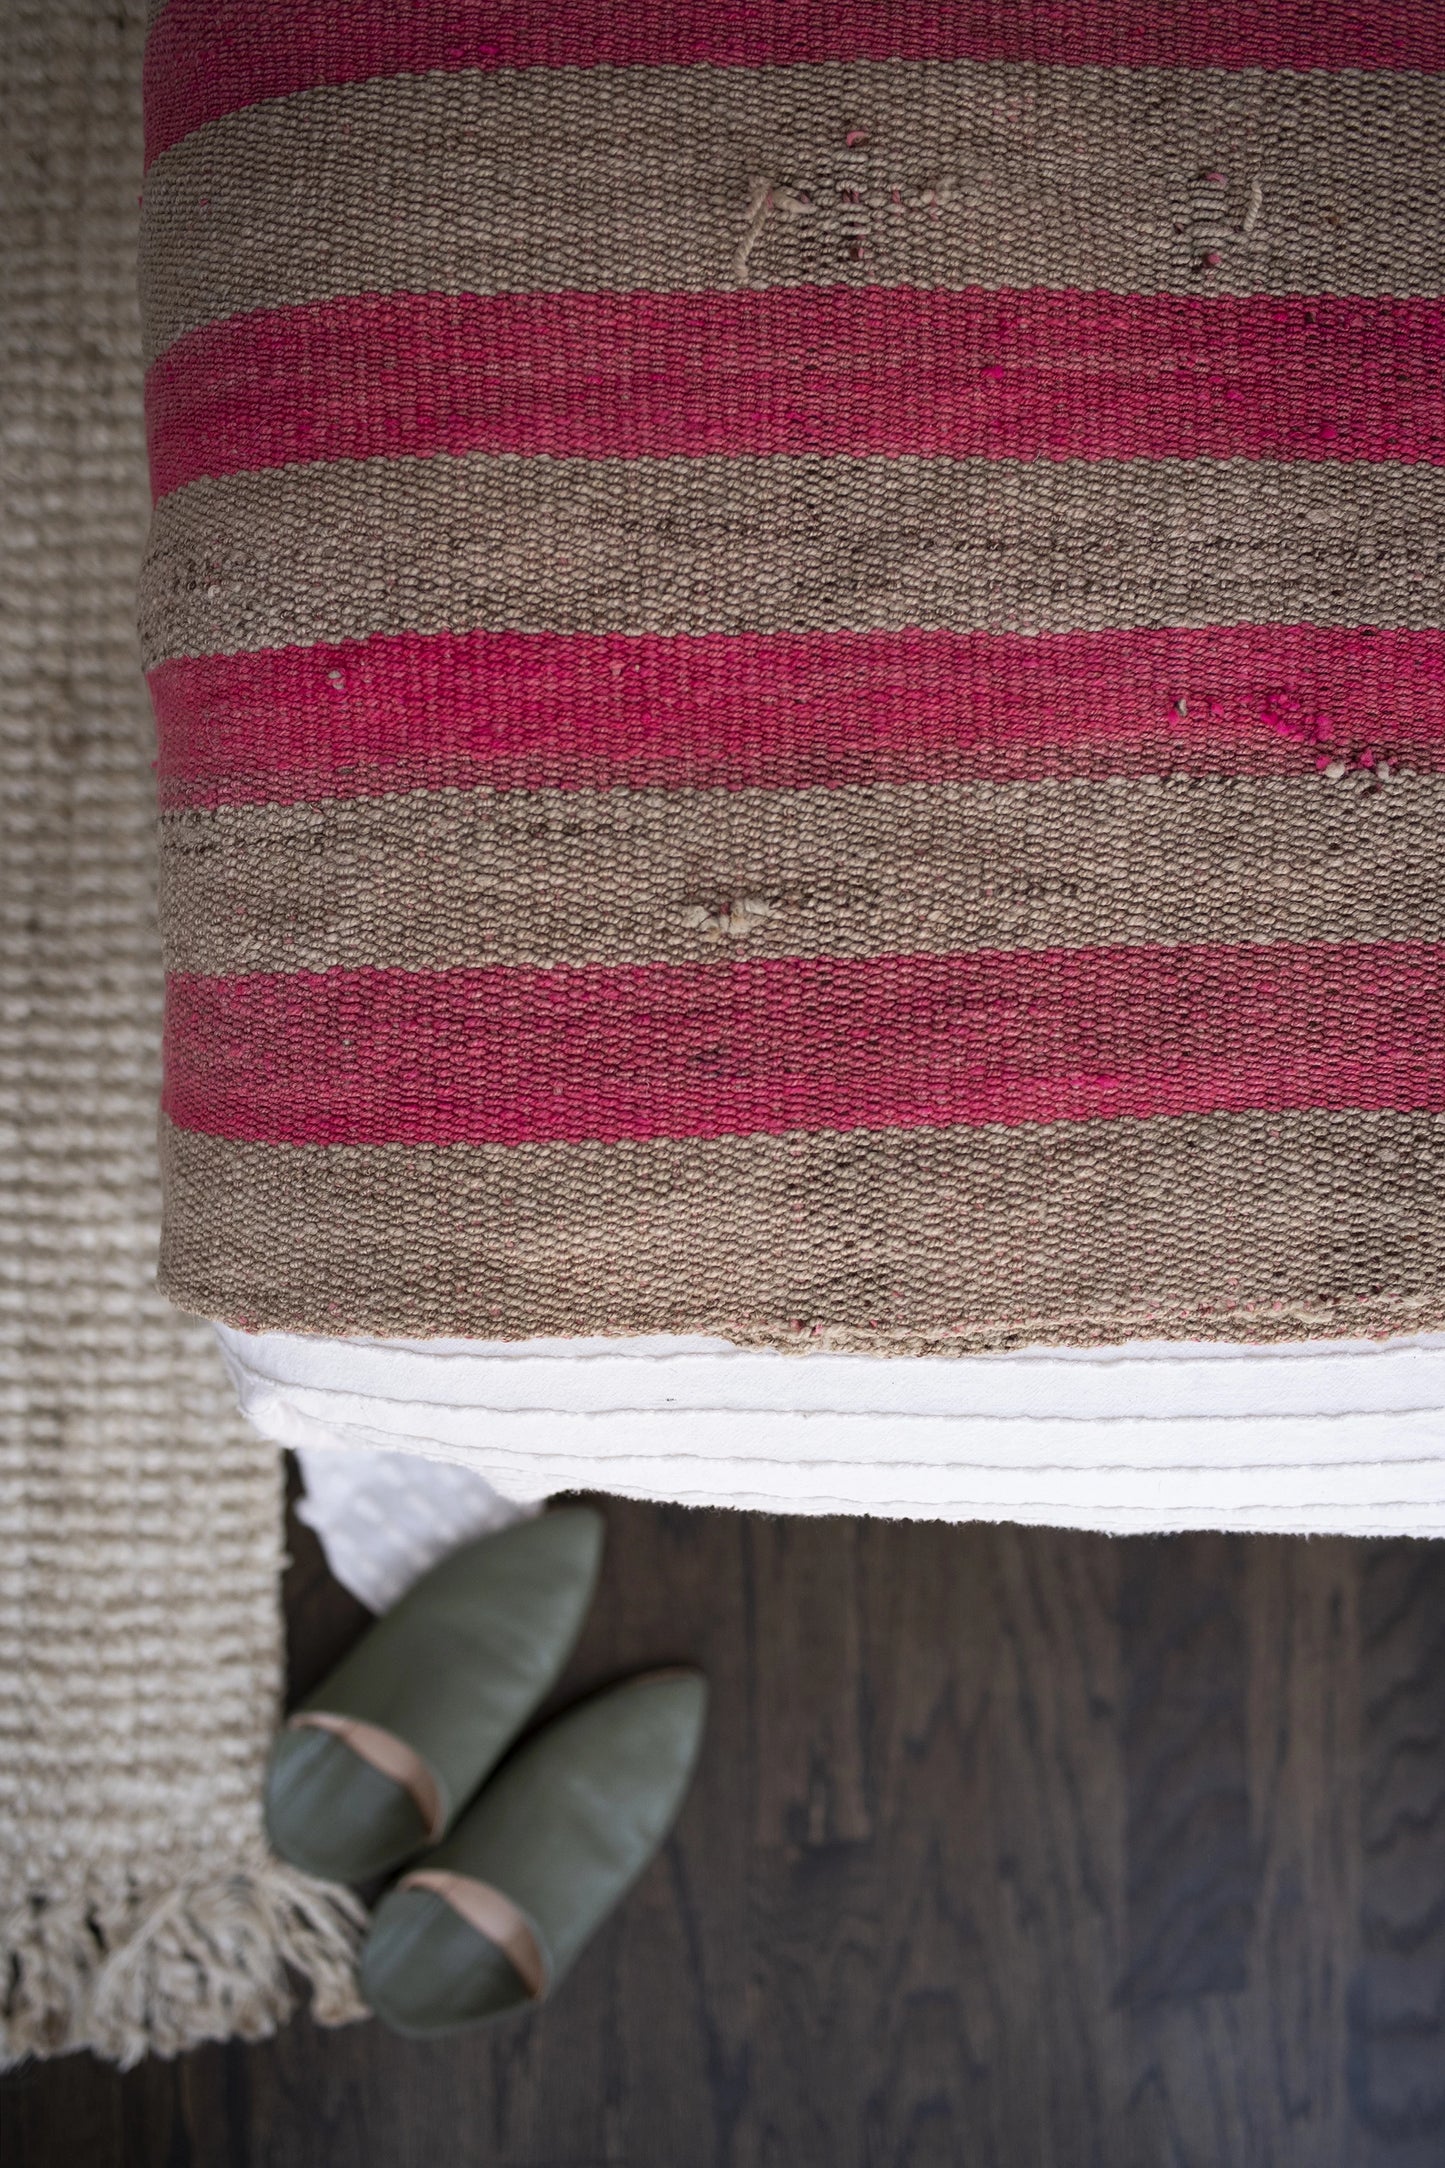 Handwoven Peruvian Frazada No. 011 - Canary Lane - Curated Textiles